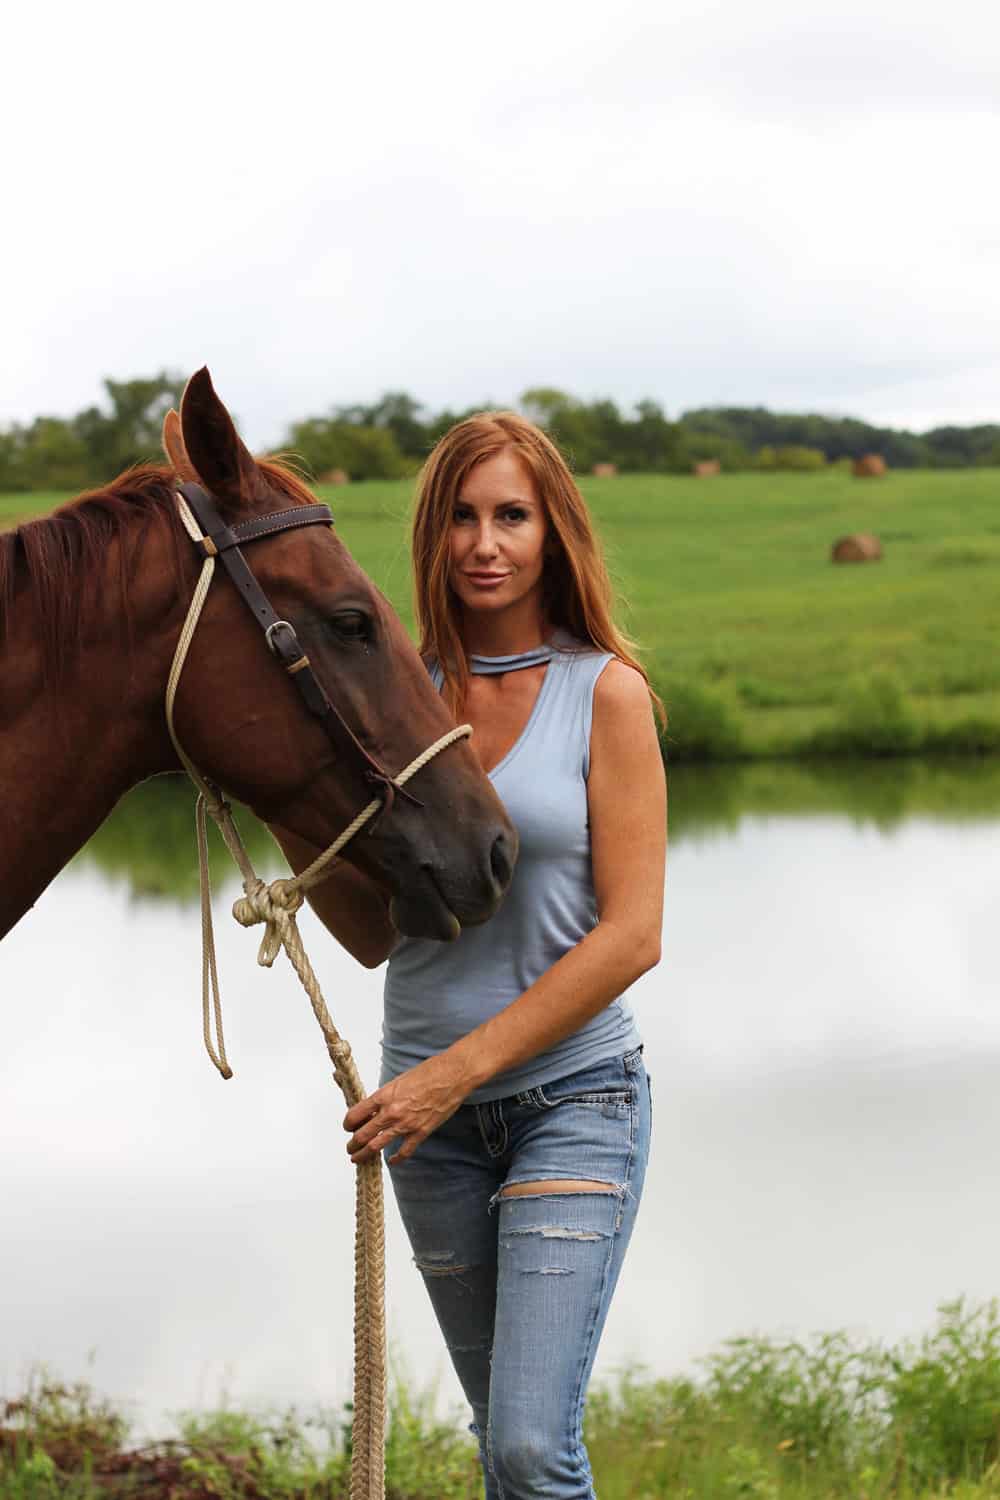 Girl holding a horse by the reins by a pond on a farm in Tennessee.